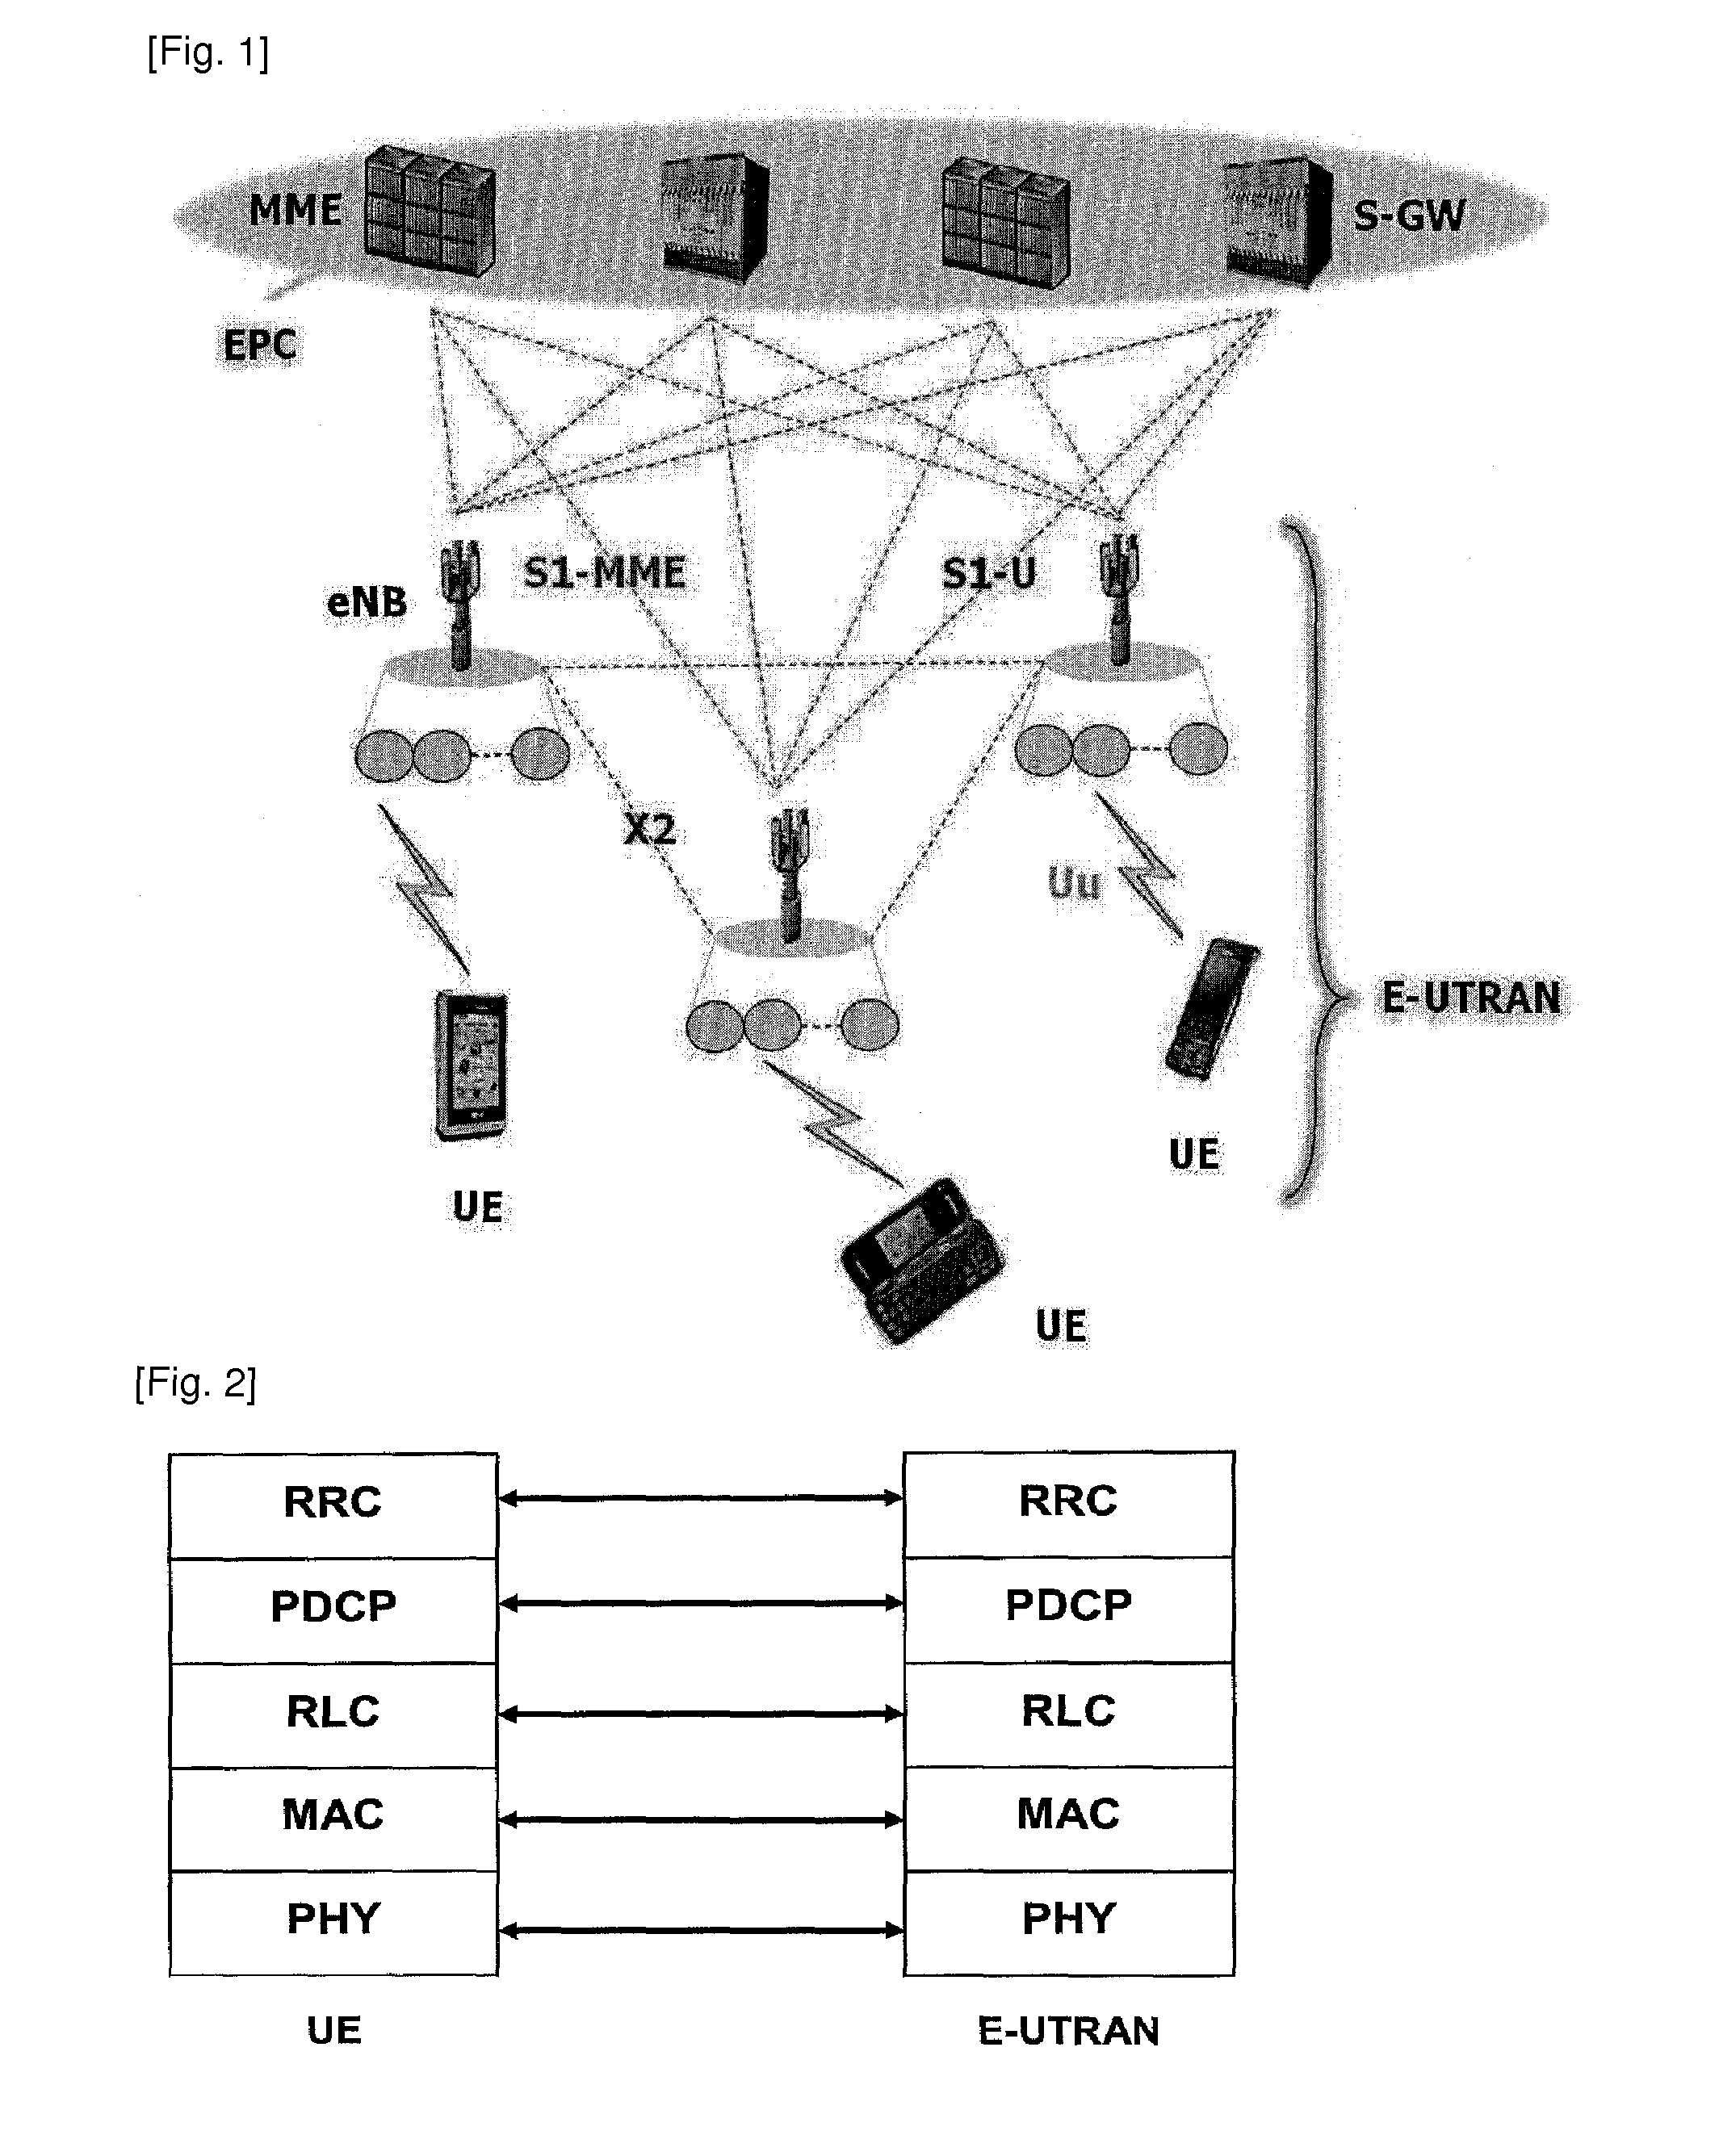 Method of utilizing a relay node in wireless communication system